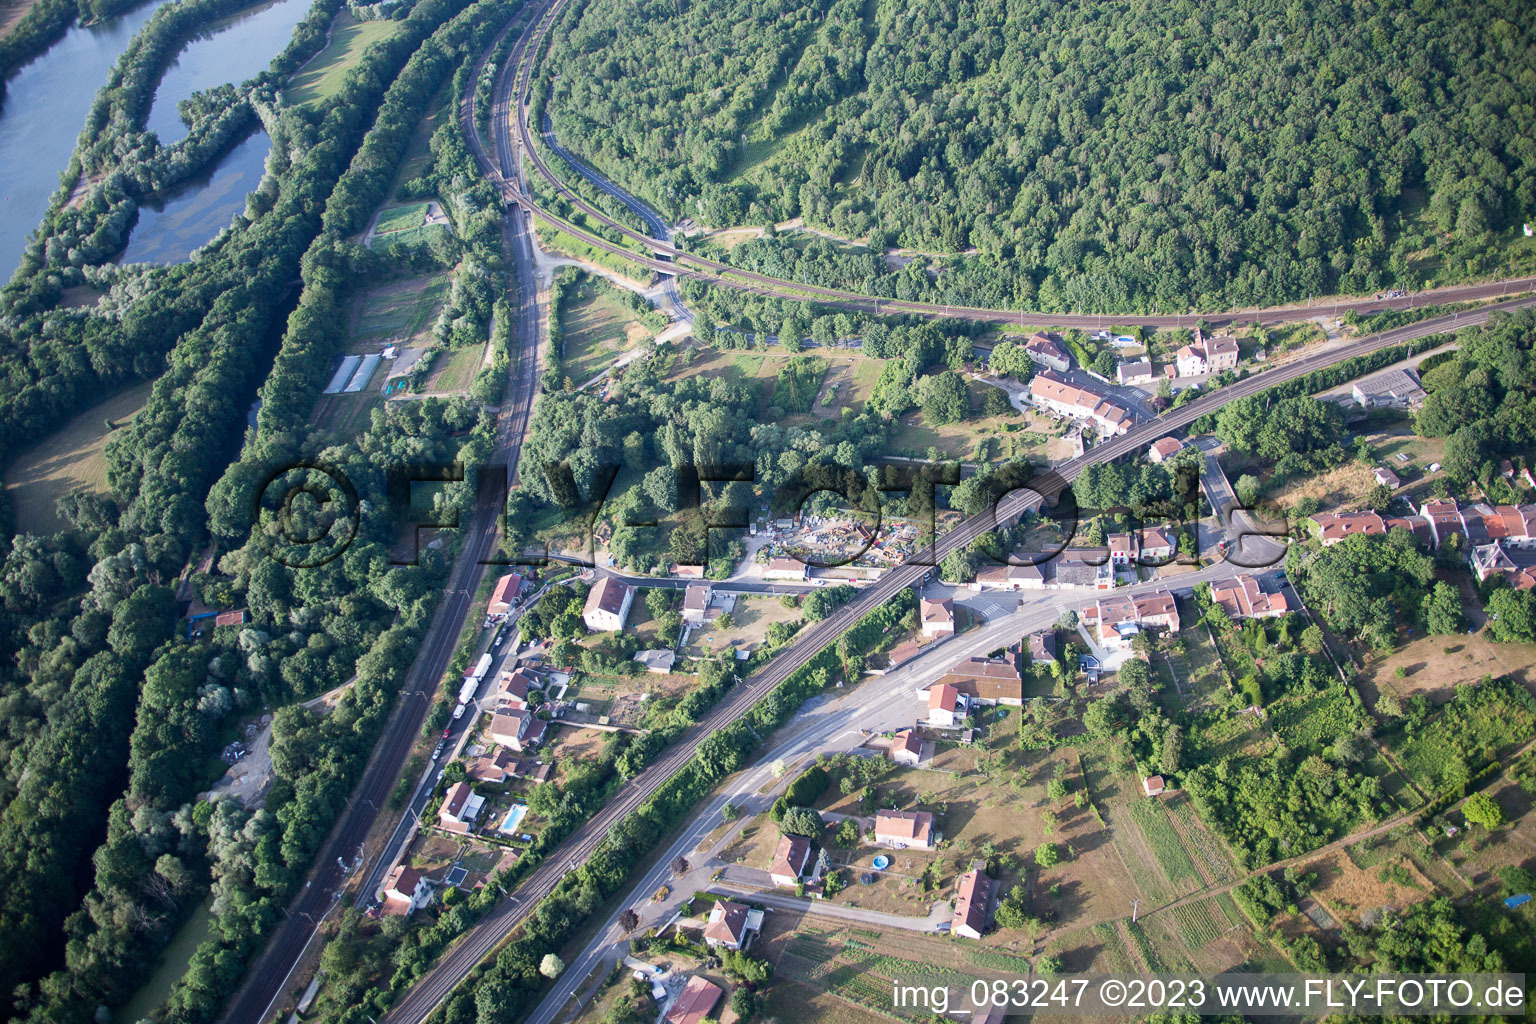 Arnaville in the state Meurthe et Moselle, France out of the air